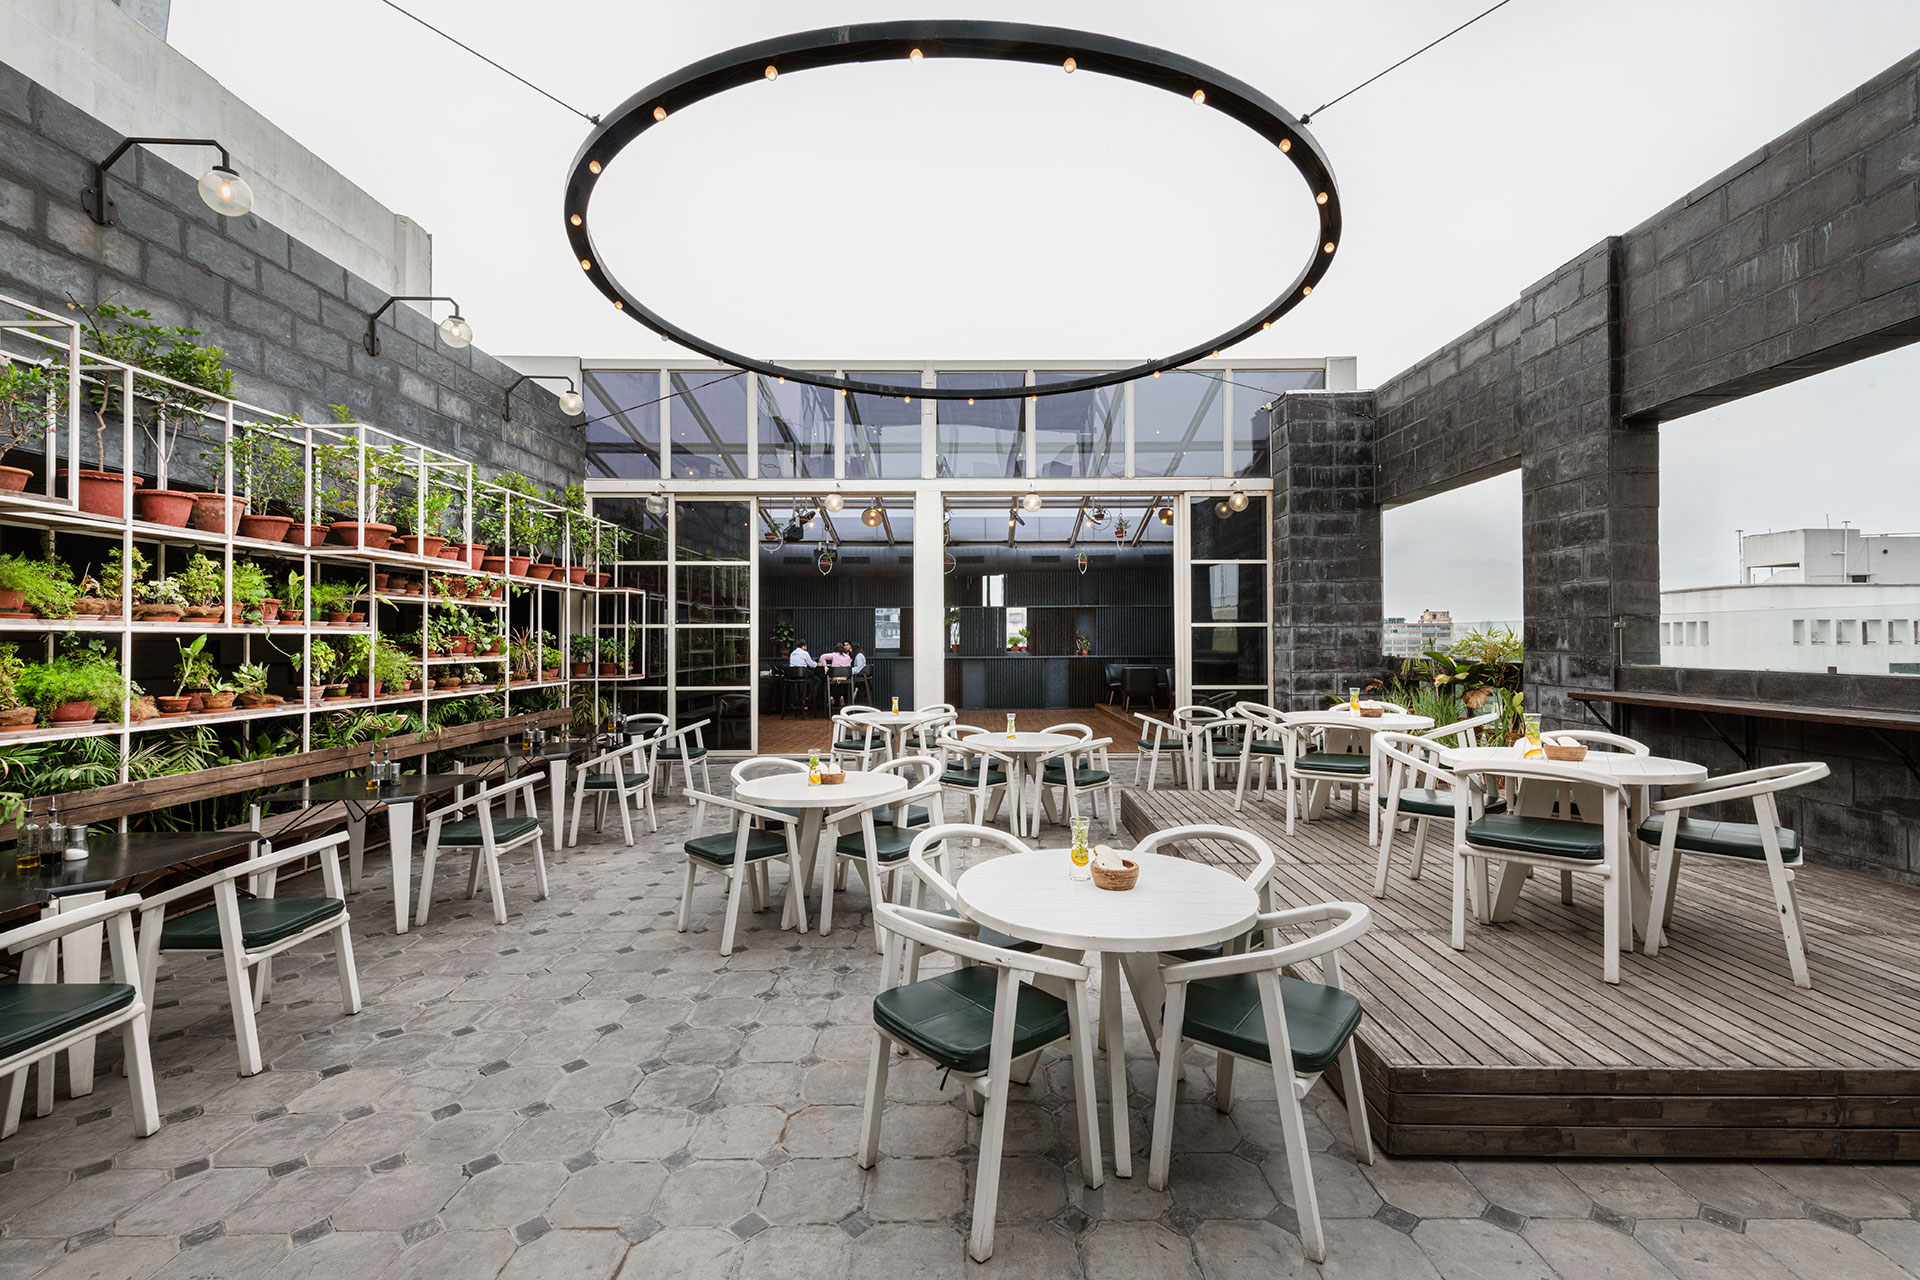 The central open to sky, roof-top courtyard, with its white furniture, live-performance wooden stage and herb-planter wall, exudes a relaxed vibe. Suspended above the courtyard is a large ring of lights.